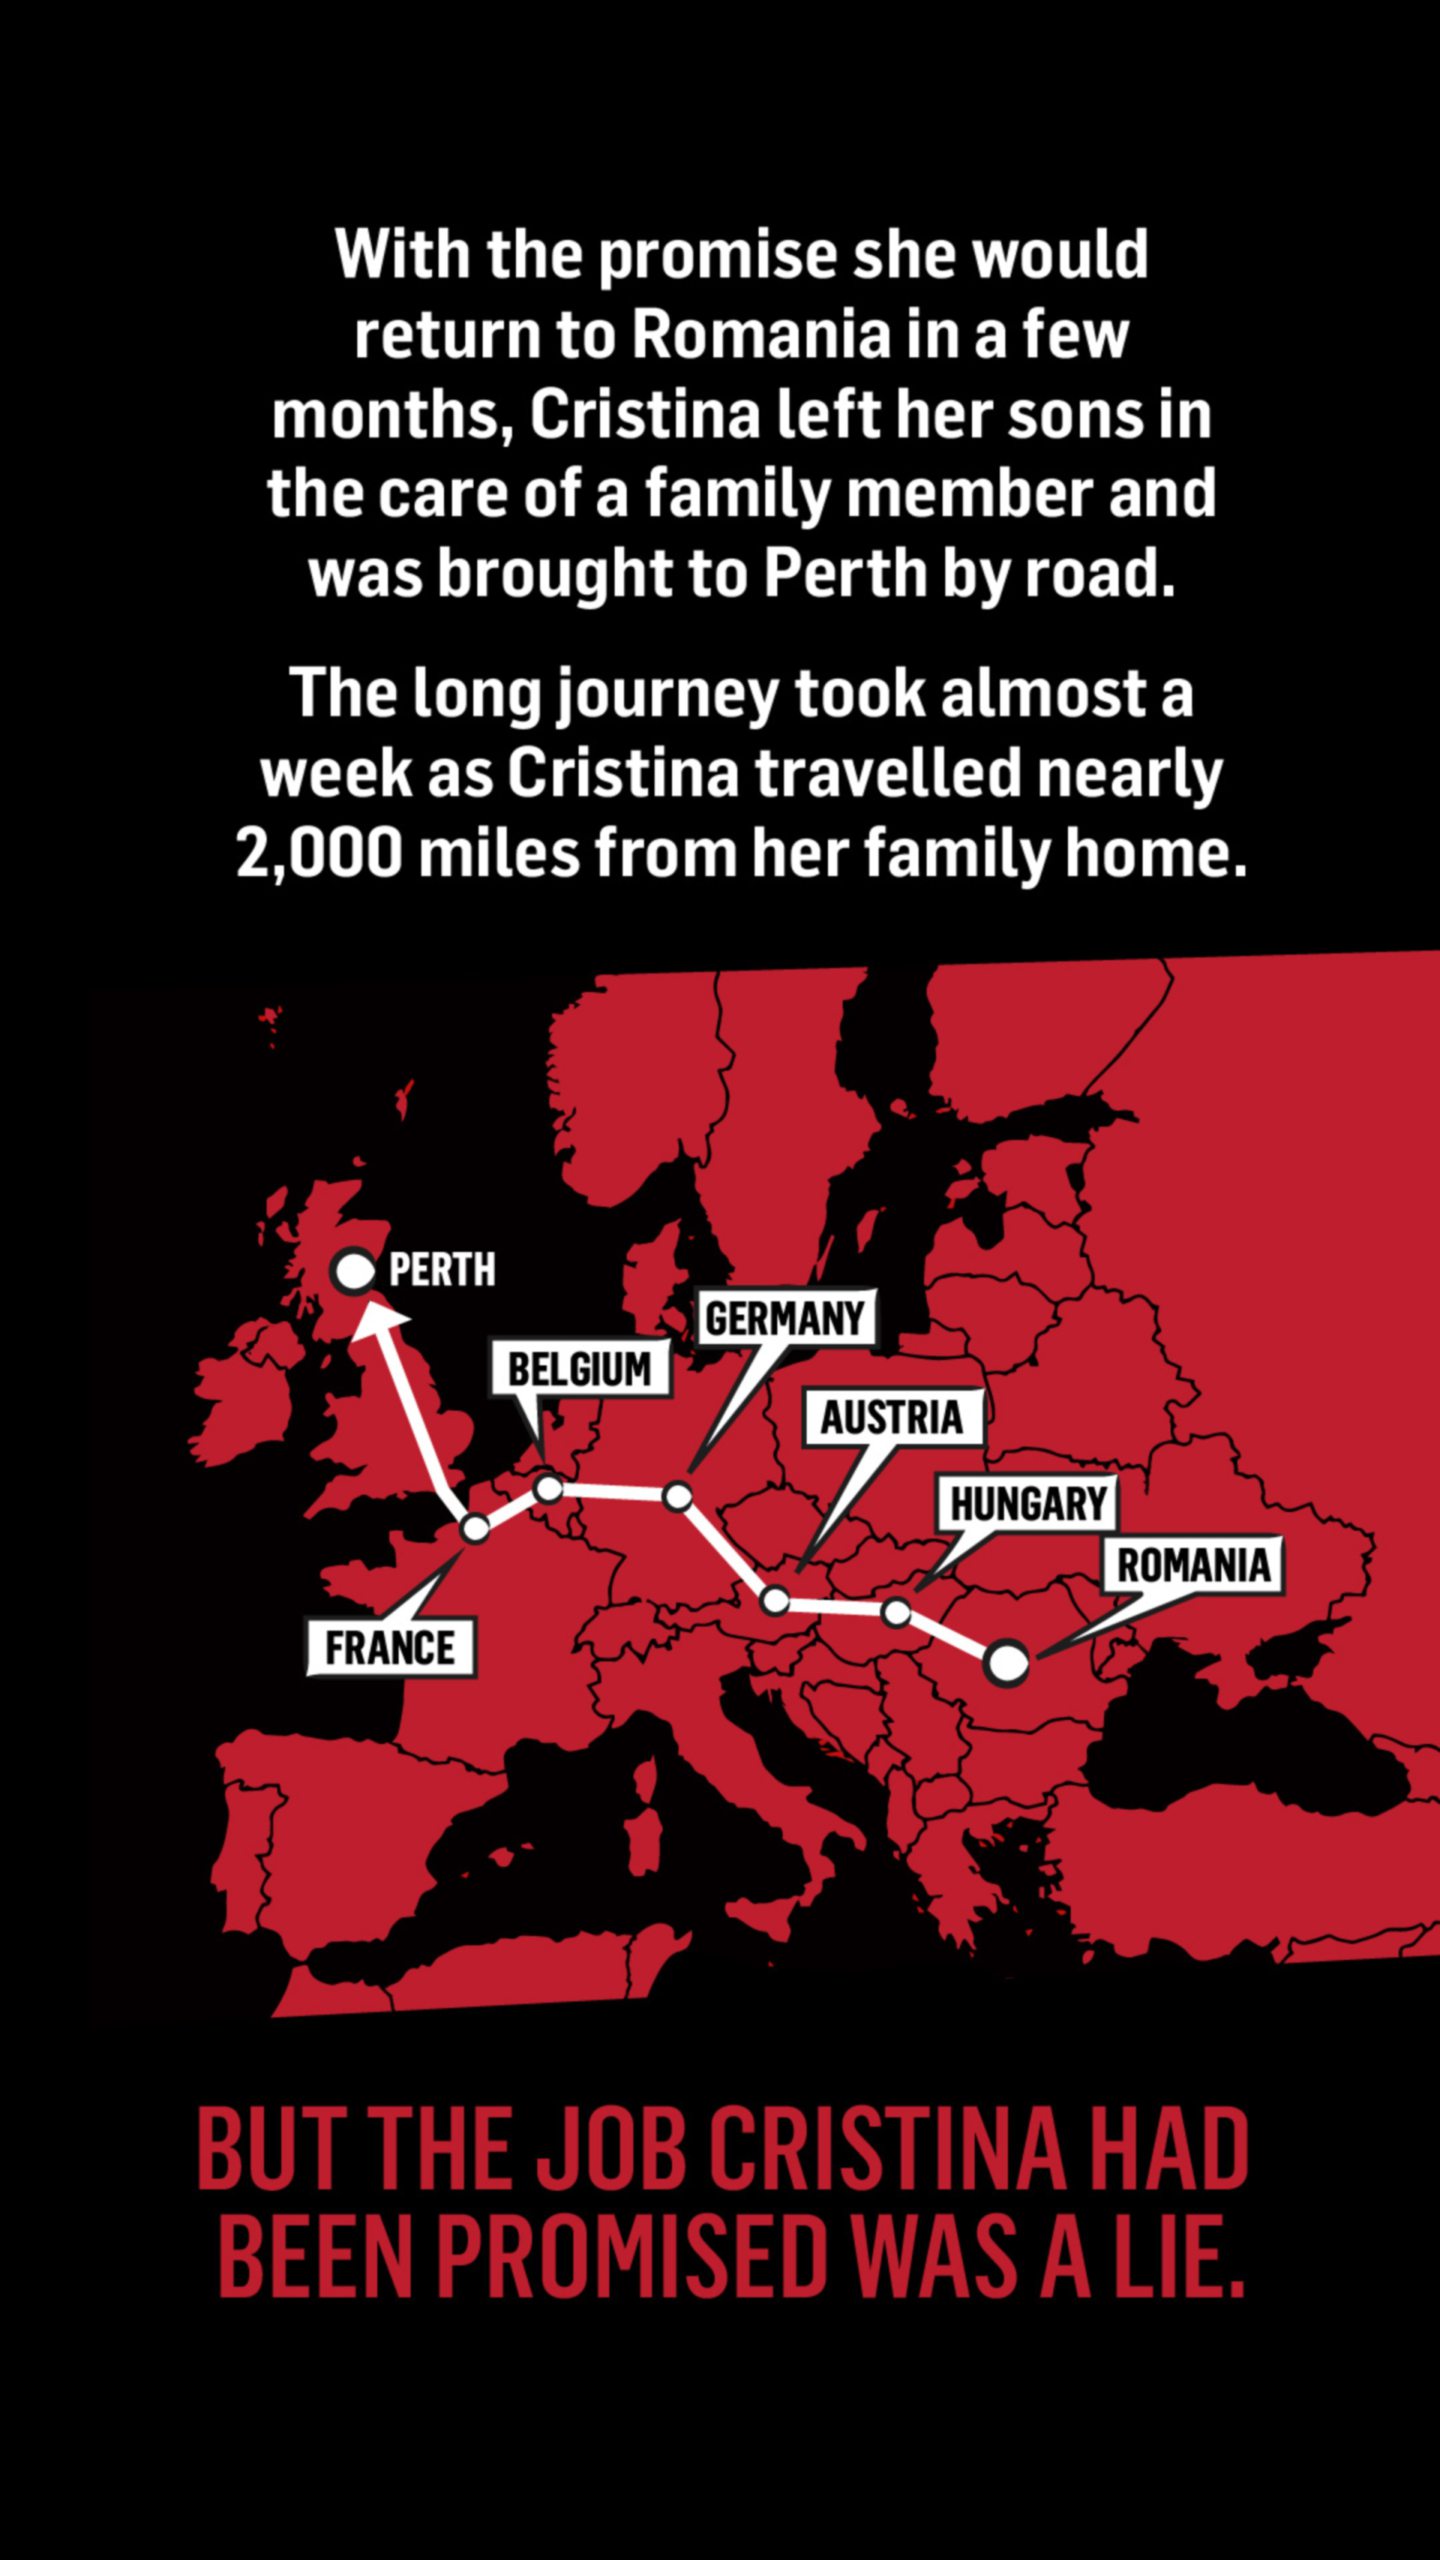 A map of Europe with a route highlighted from Romania to Perth in Scotland with the words: With the promise she would return to Romania in a few months, Cristina left her sons in the care of a family member and was brought to Perth by road.

The long journey took almost a week as Cristina travelled nearly 2,000 miles from her family home. But the job Cristina had been promised was a lie. 